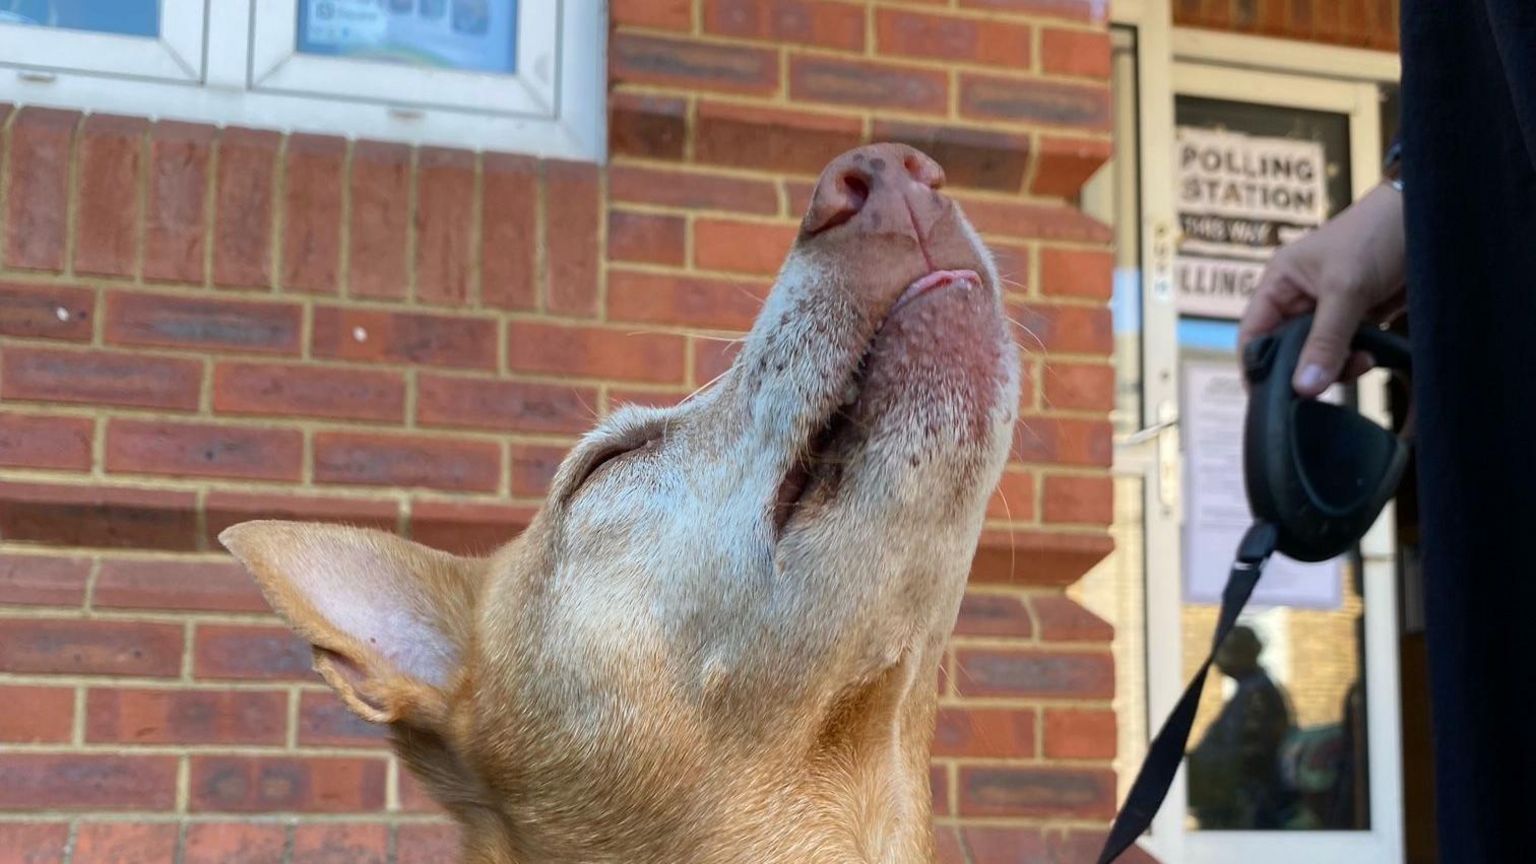 Fausto the dog sniffs the air outside a polling station in Twickenham, London